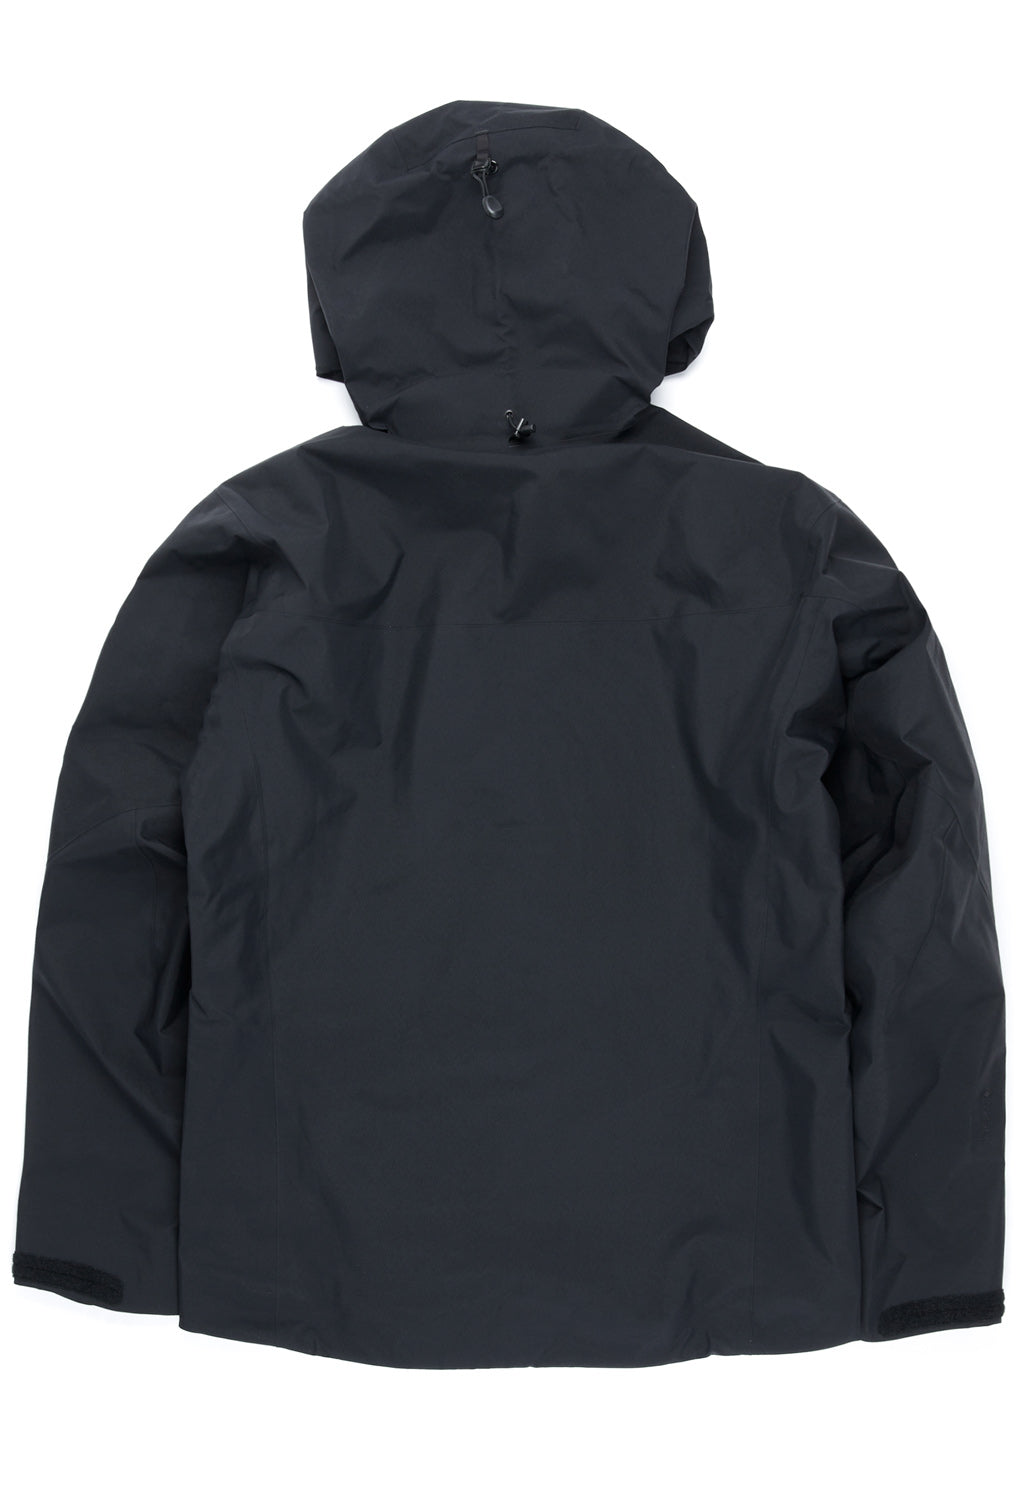 Not For Sale: Arc'teryx/Gore-Tex Pro Demo Jacket